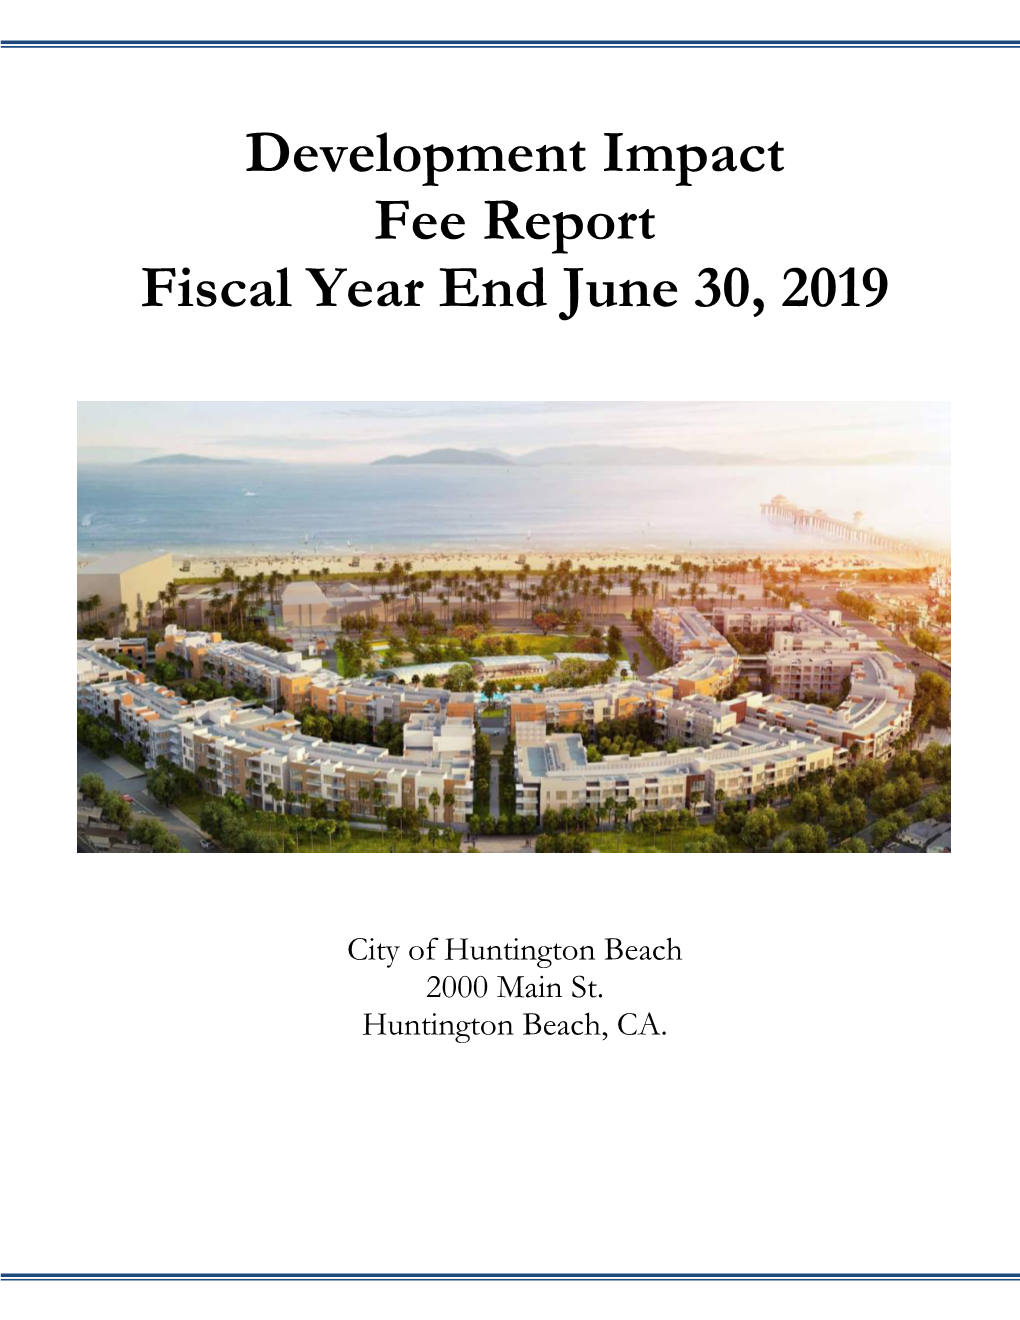 Development Impact Fee Report Fiscal Year End June 30, 2019